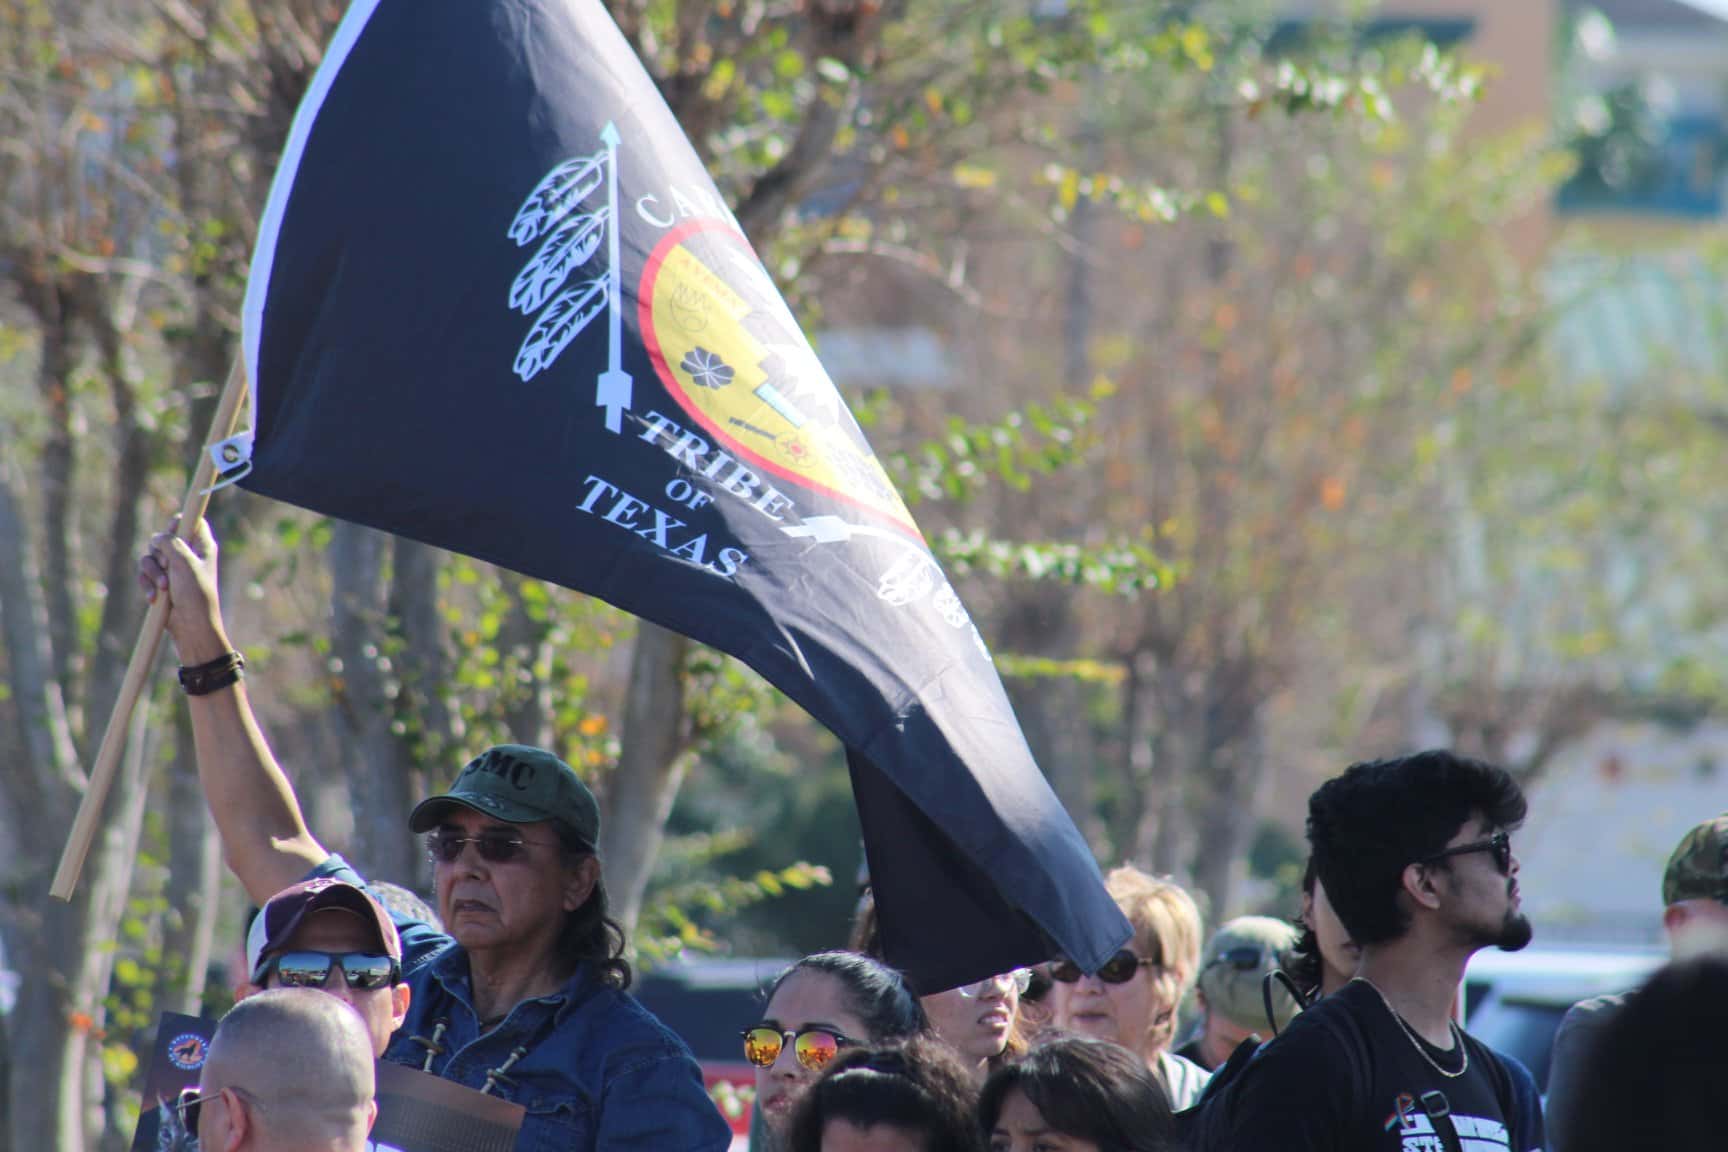 A Carrizo Comecrudo Tribe Member holds a flag, displaying the organization's logo.